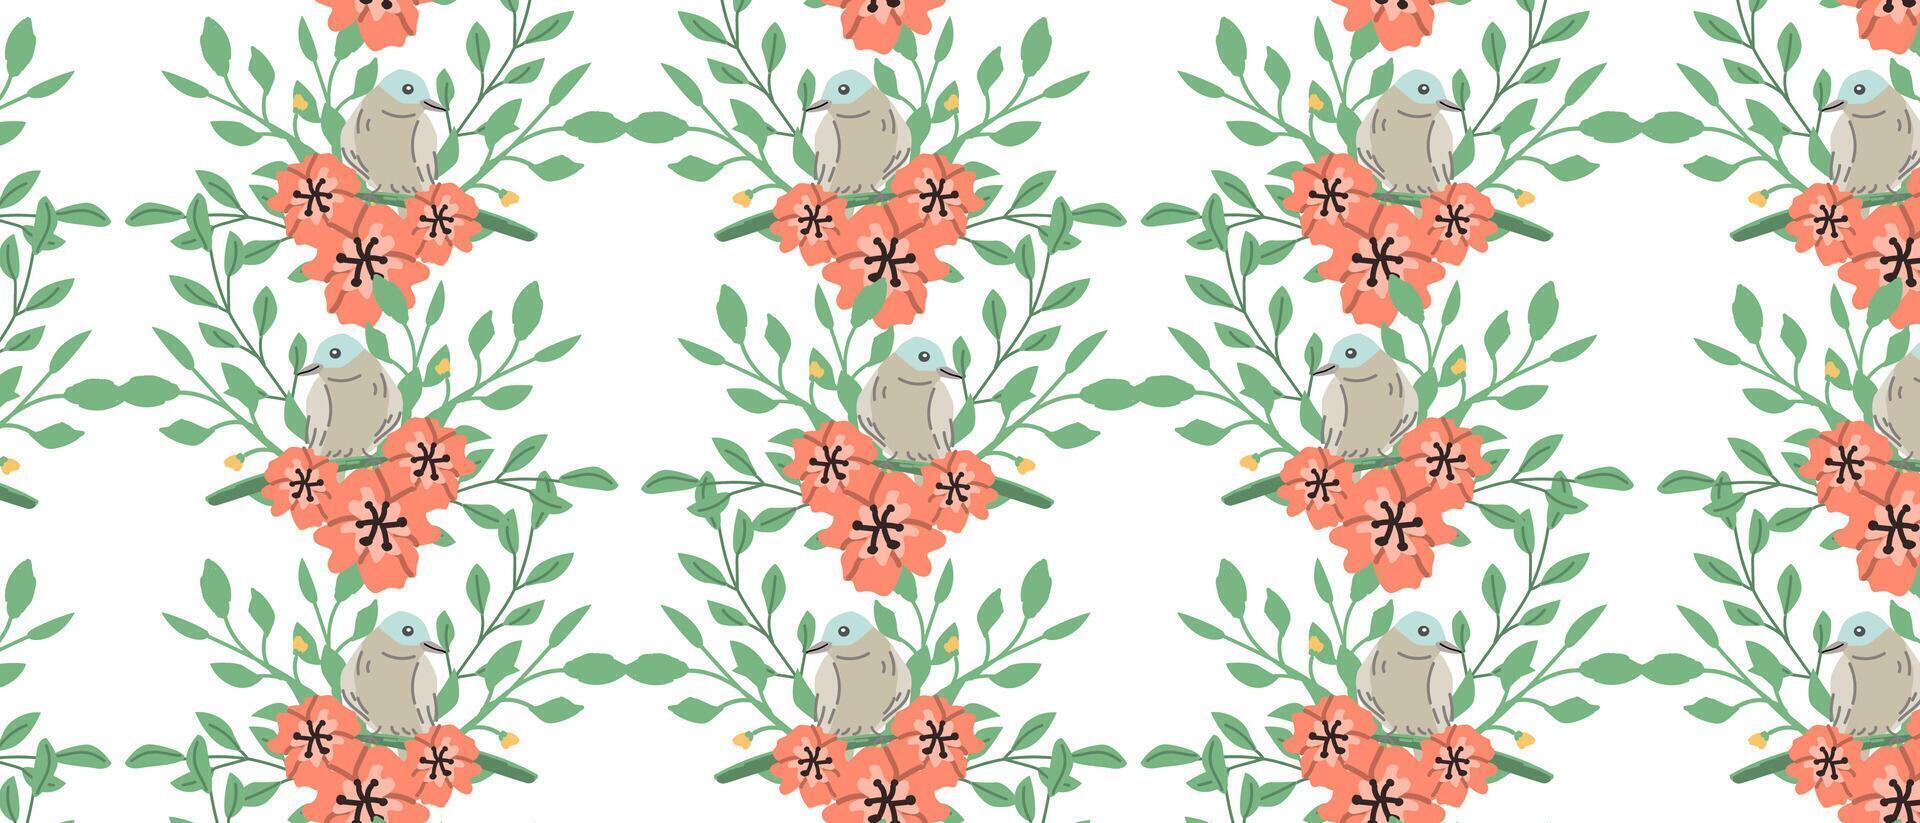 floral seamless pattern with bird ditsy pink flowers. Vector illustration in vintage style. Elegant design for textile, interior decoration. Pink daisy flowers and leaves and bird seamless background.